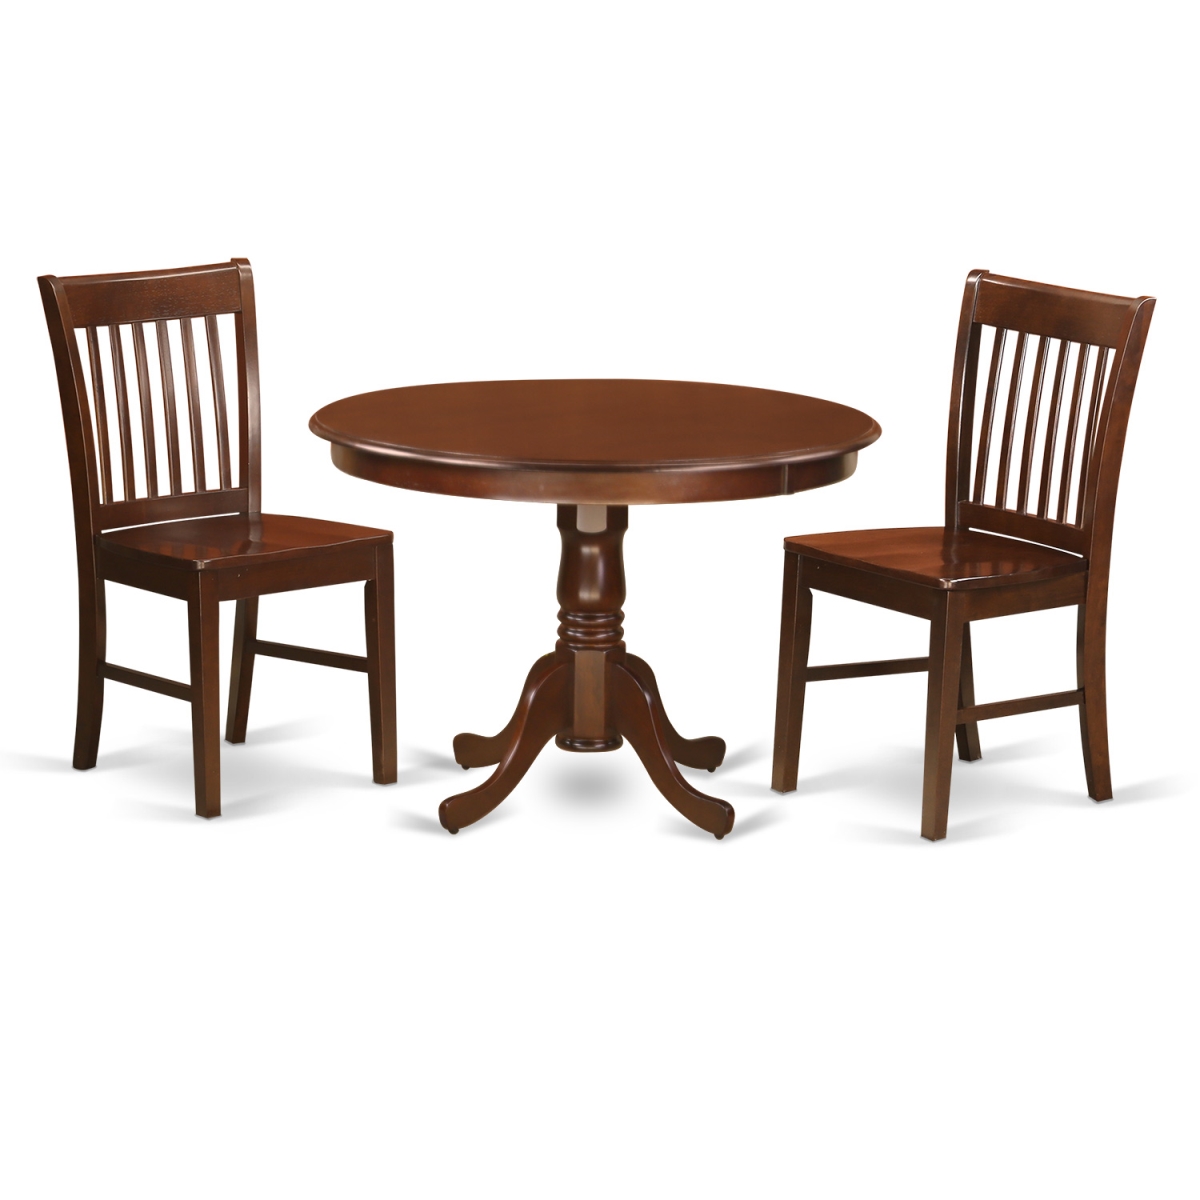 Picture of East West Furniture HLNO3-MAH-W Dining Set - One Round Kitchen Table & Two Chairs Wood Seat&#44; Mahogany - 42 in. - 3 Piece